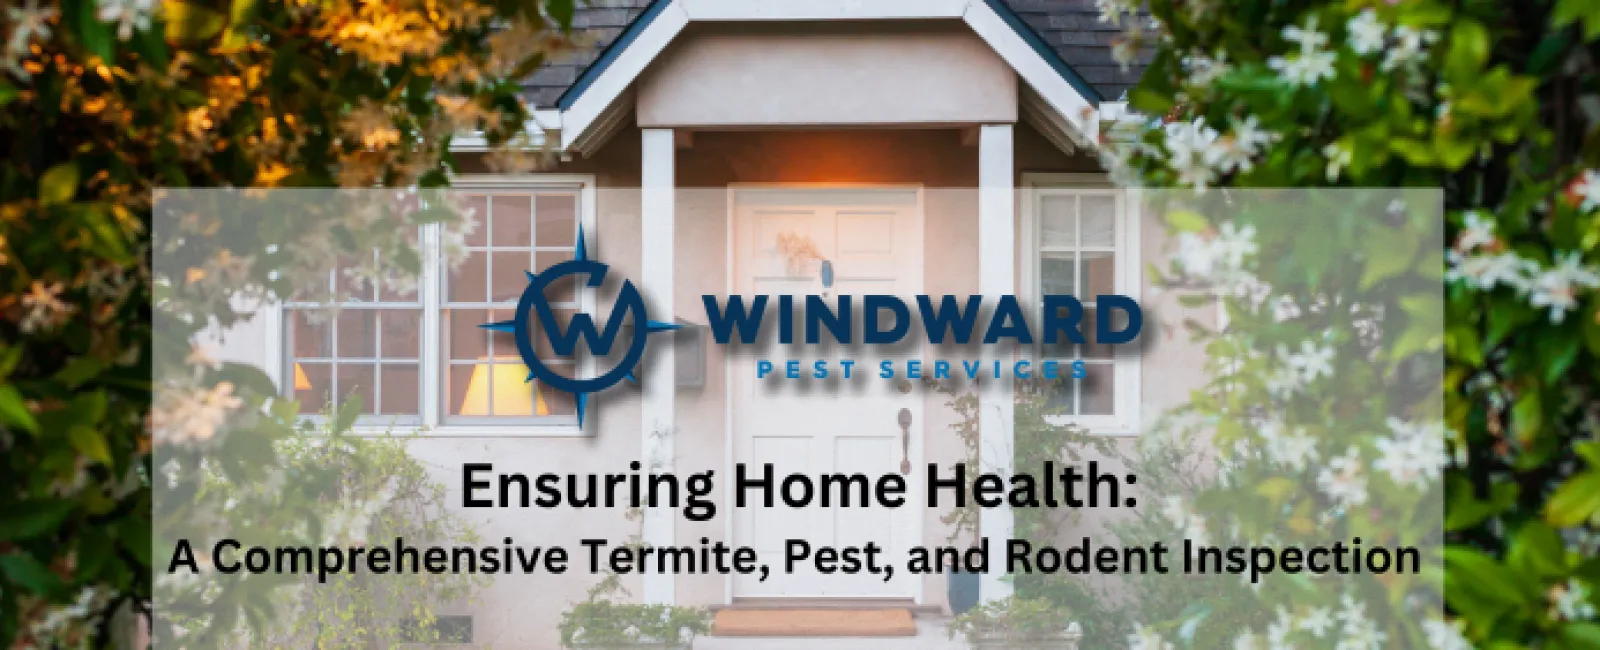 Ensuring Home Health: A Comprehensive Termite, Pest, and Rodent Inspection